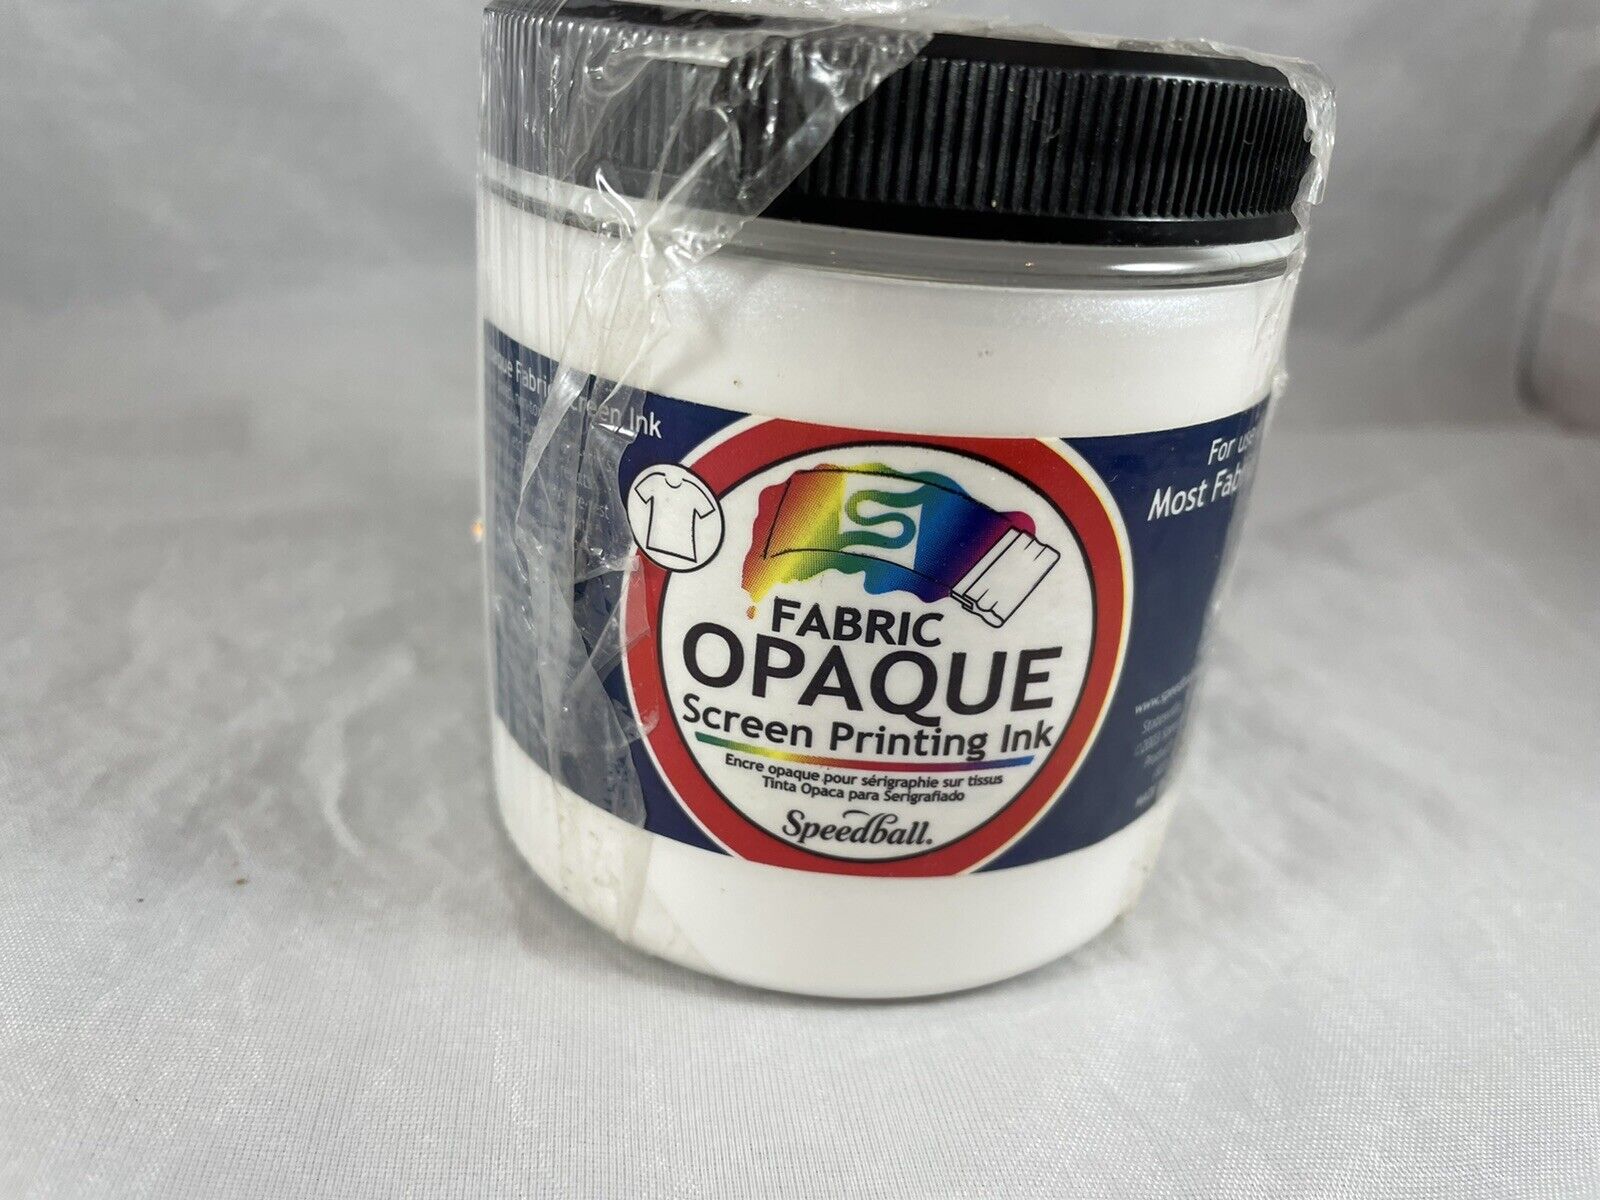 SPEEDBALL ART OPAQUE 4803 FABRIC SCREEN PRINTING INK PEARLY WHITE 8OZ